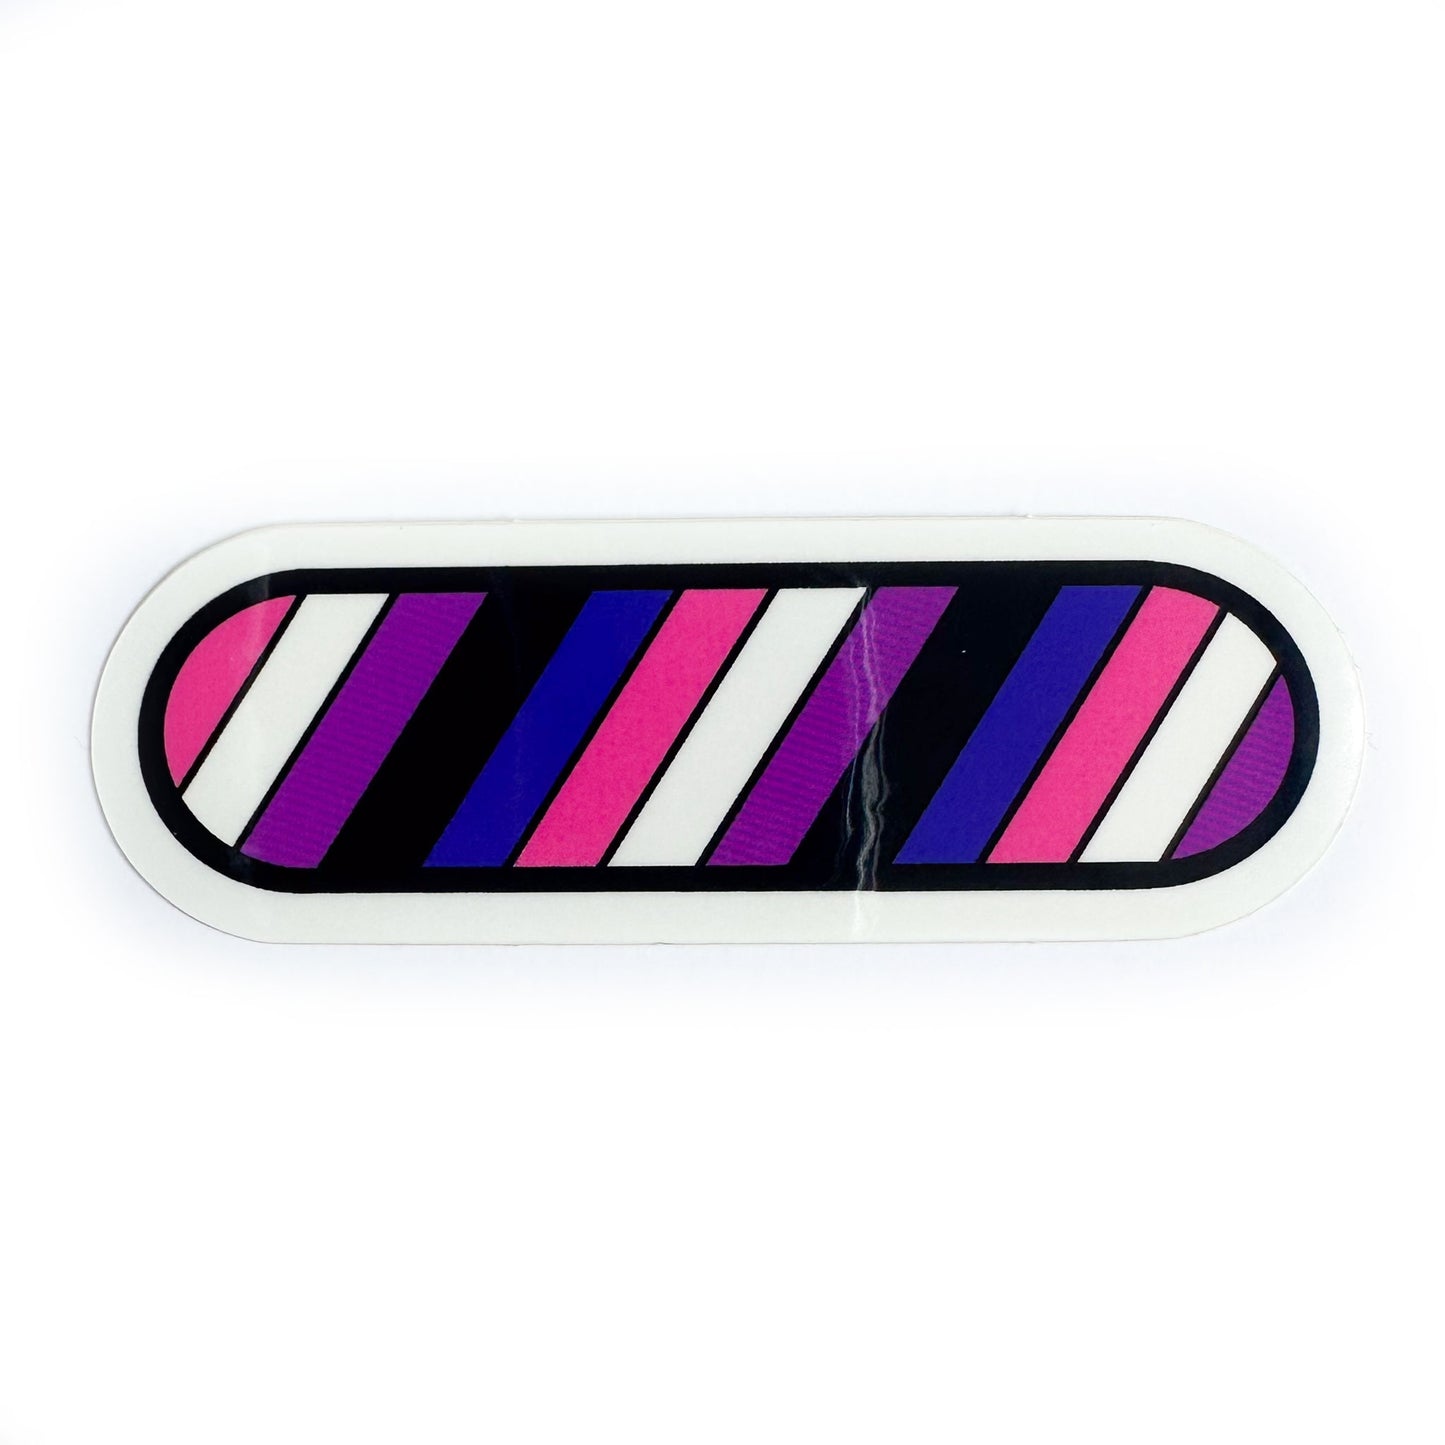 A sticker in the colors of the Gender Fluid Pride Flag, it's the shape of a capsule with diagonal stripes of pink, white, purple, black and blue. 